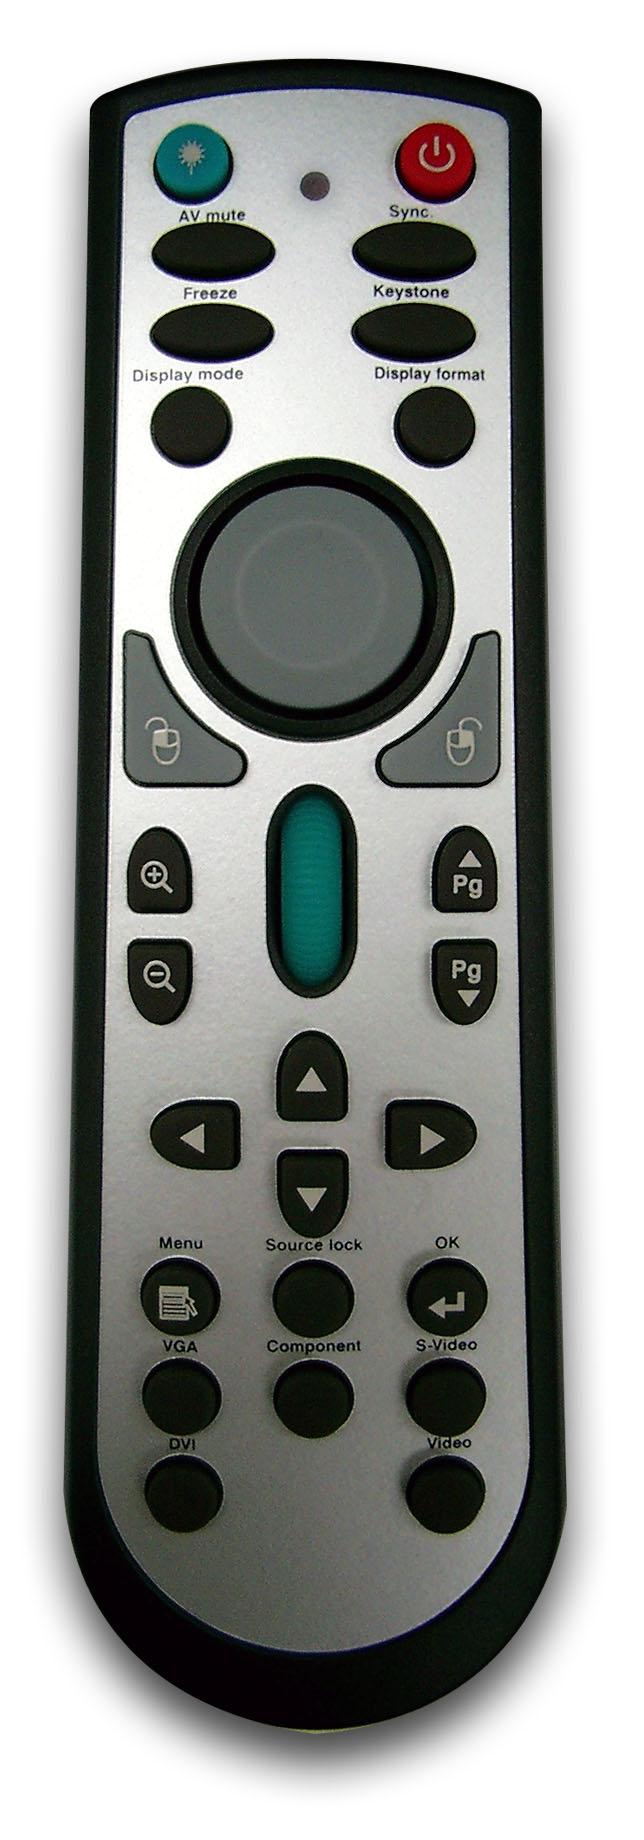 SALE on Projector Bulbs at www.bulbamerica.com Introduction Remote Control with Mouse Function & Laser Pointer 1. 2. 3. 4. 5. 6. 7. 8. 9. 2 10. 3 11. 12. 4 13. 14.